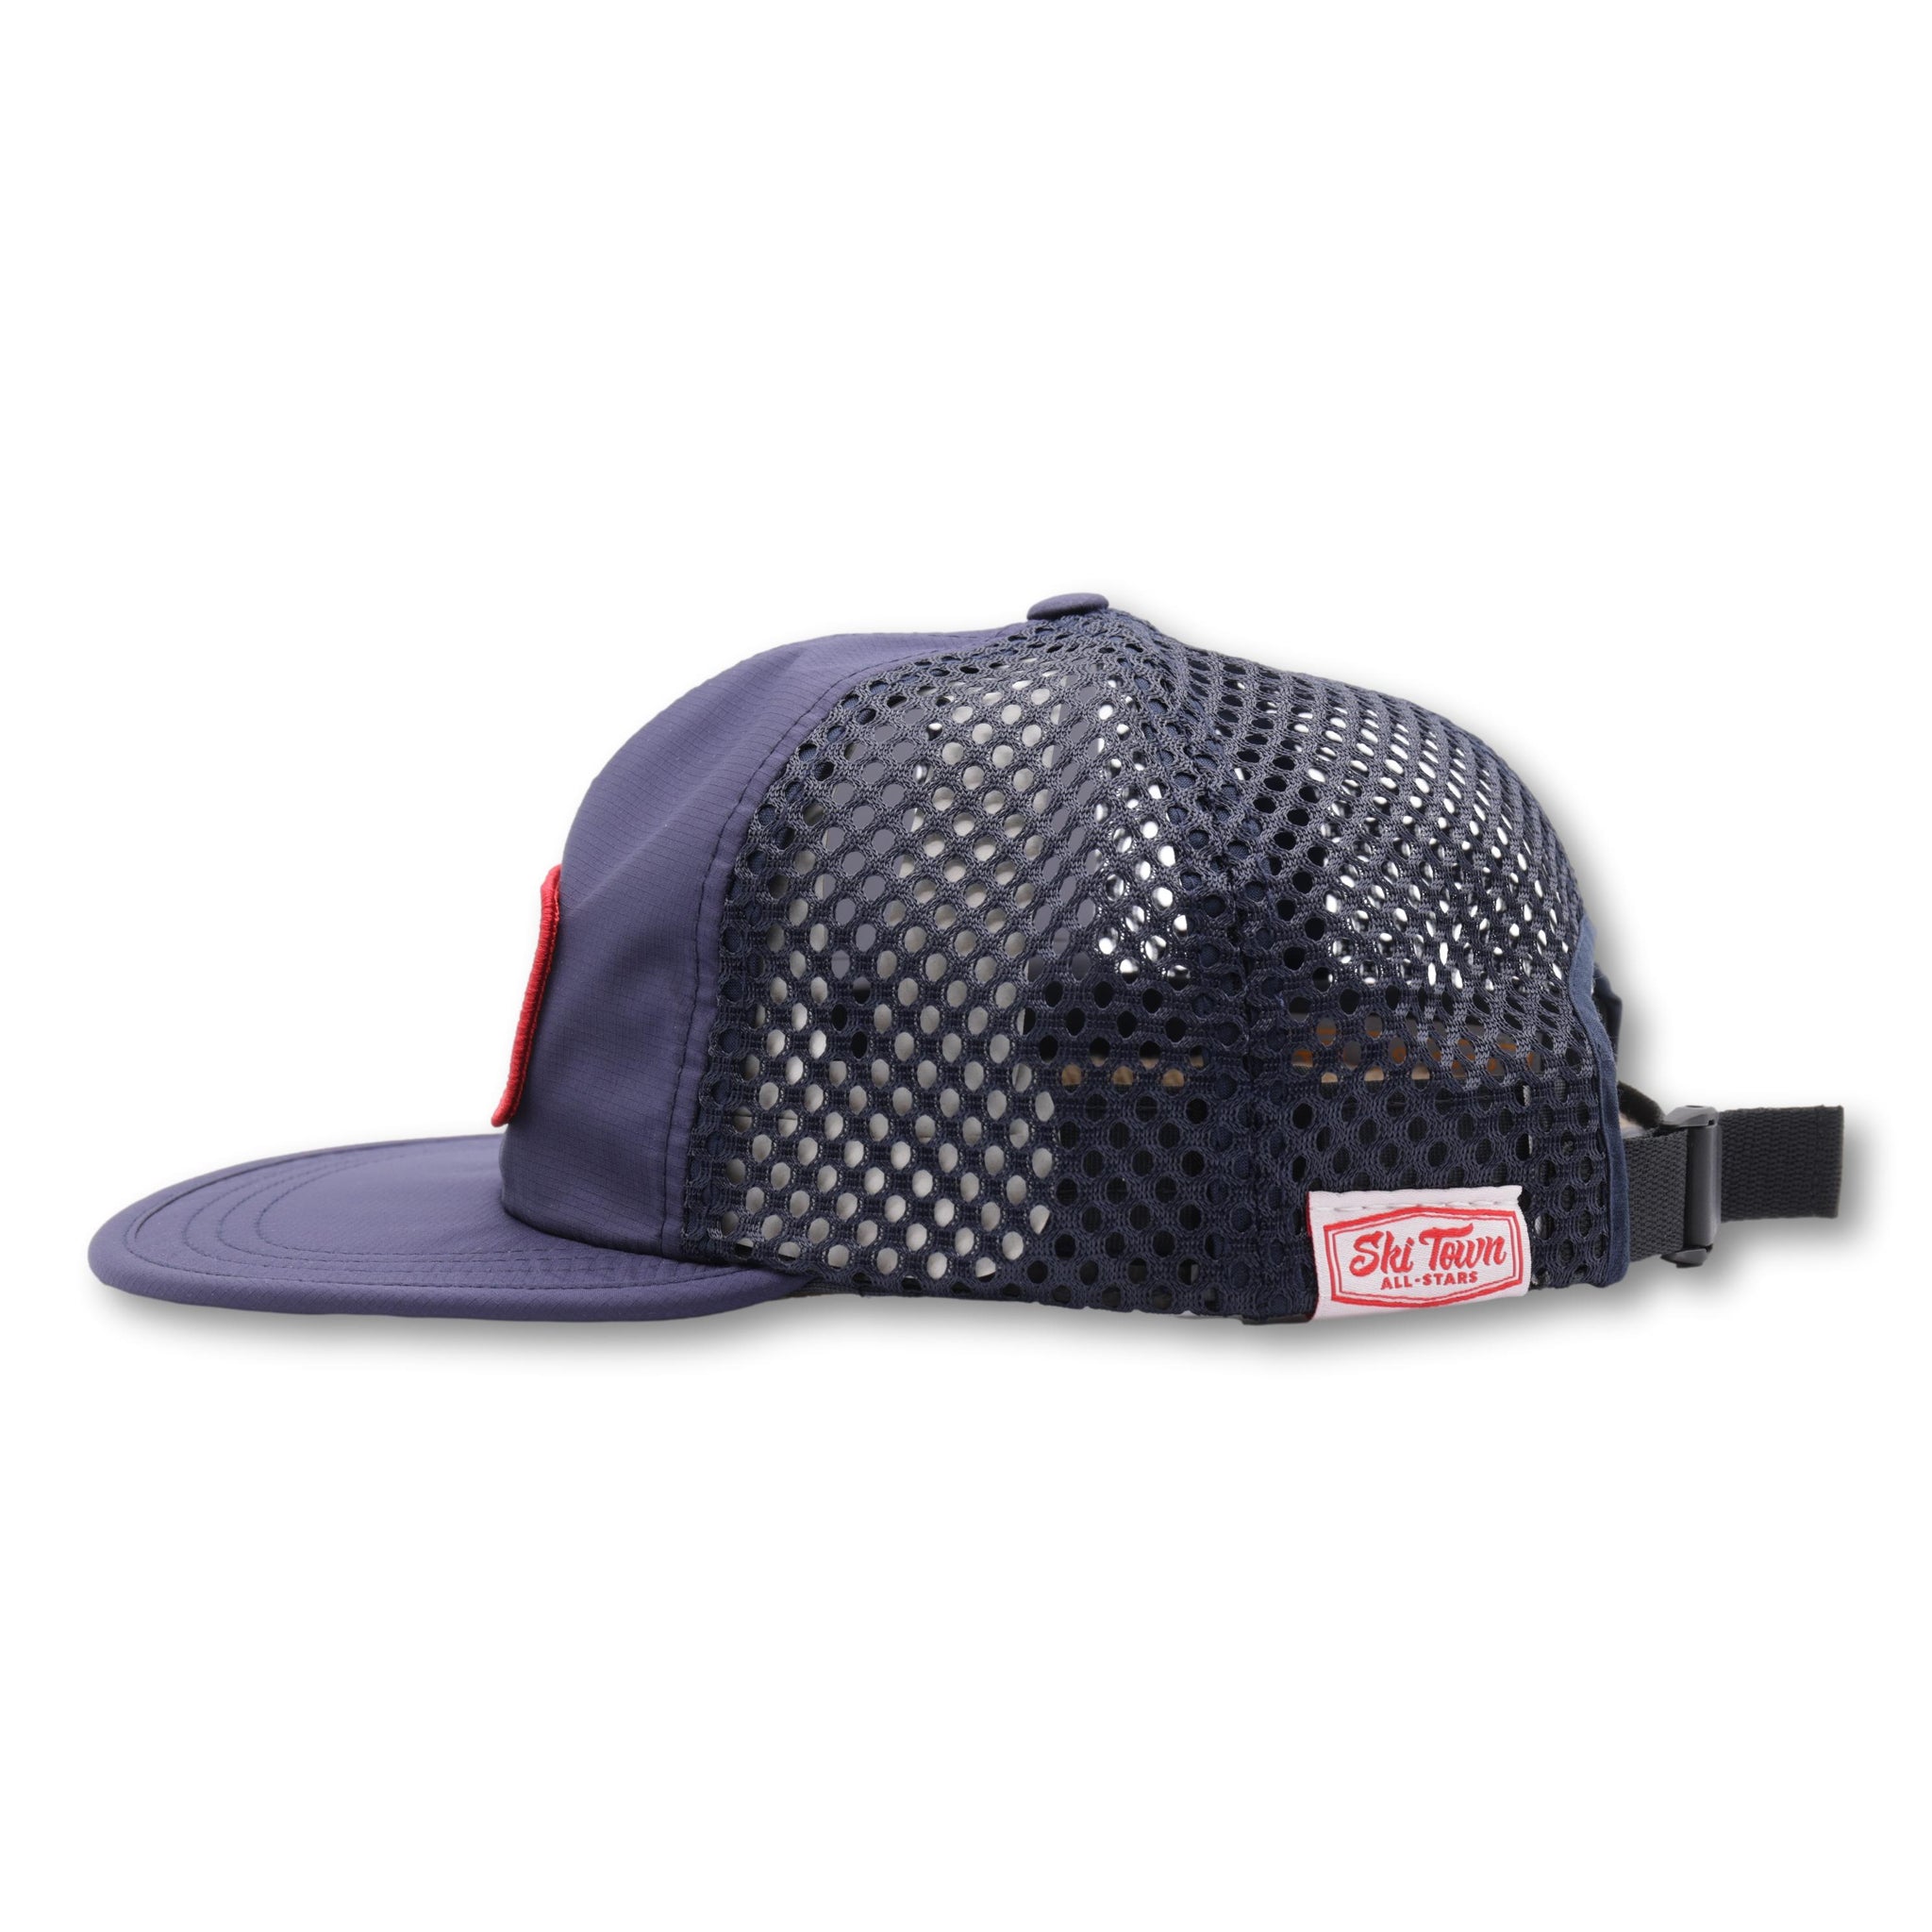 Cotton Boonie Hat with Turtle Tape Band - DPC Outdoor Hats Navy / Medium (57 cm)